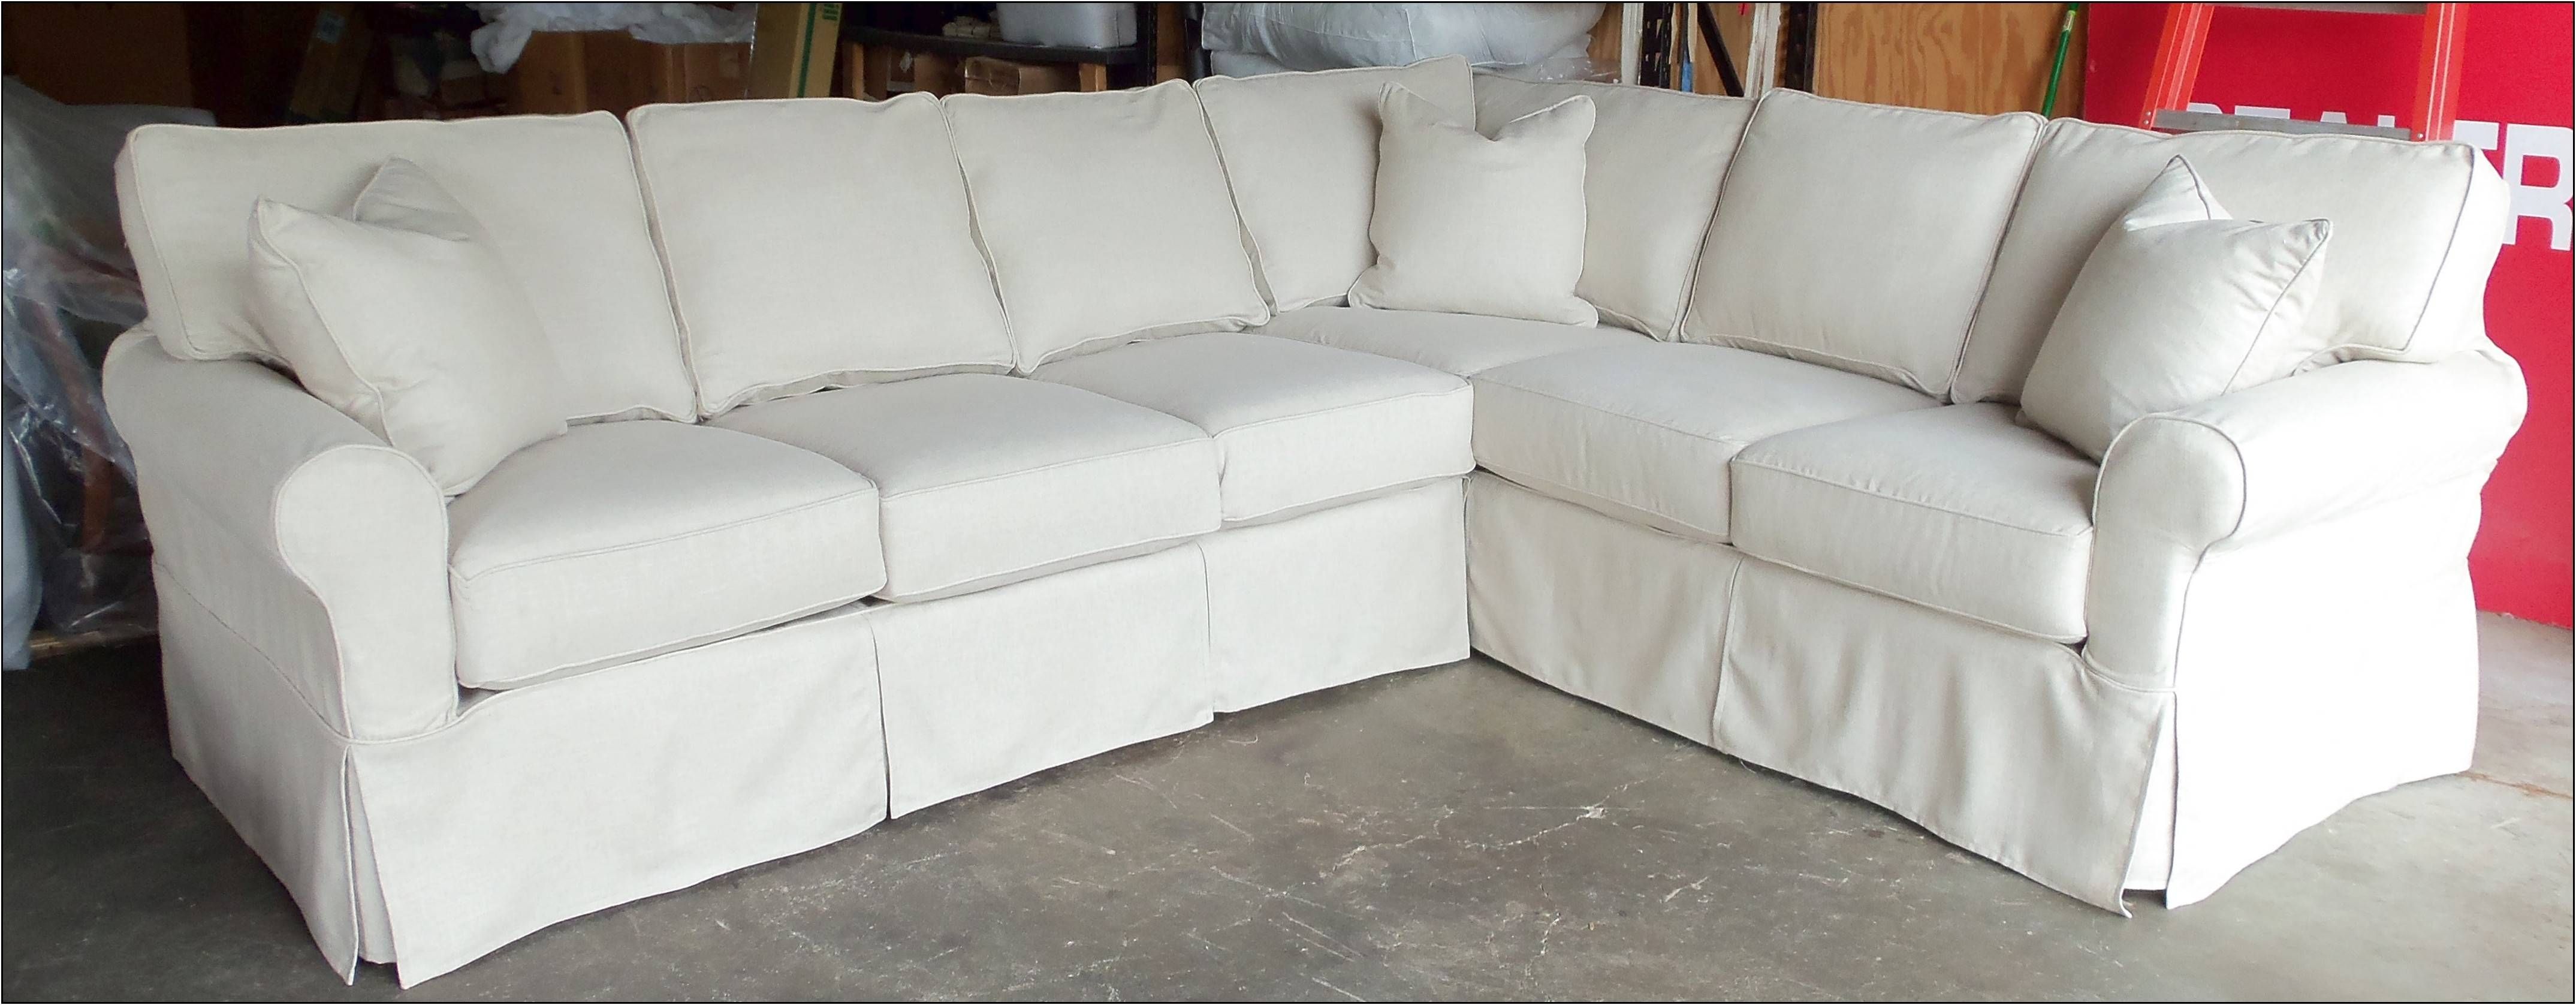 Furniture: Outfit Your Home With Pretty Jcpenney Couches Design Regarding 3 Piece Sofa Slipcovers (View 14 of 15)